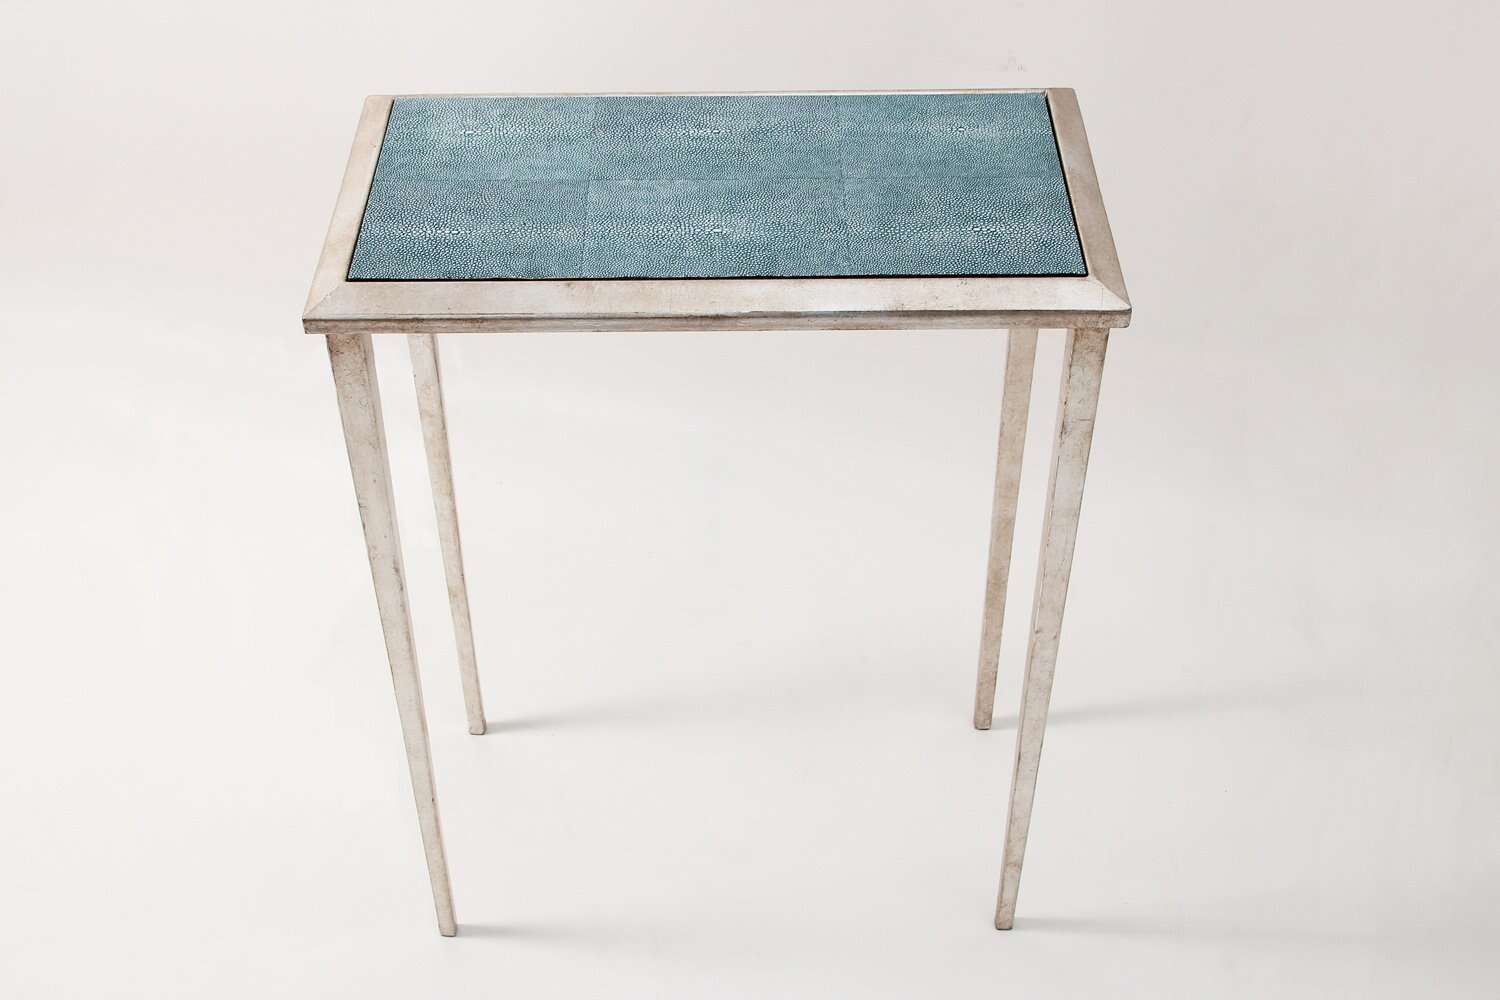 Lamp table ideal shagreen lamp table Narrowside table